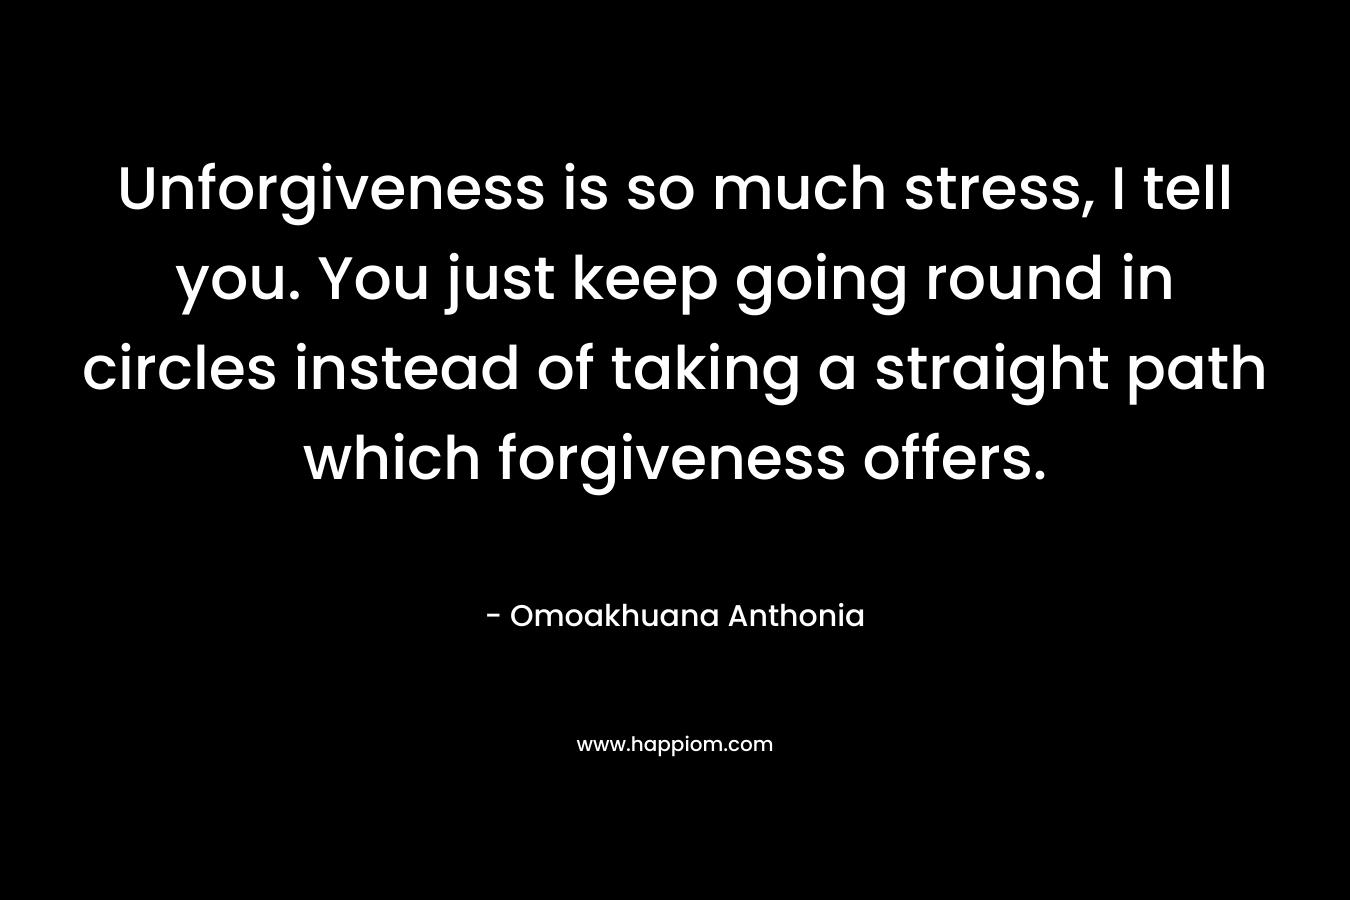 Unforgiveness is so much stress, I tell you. You just keep going round in circles instead of taking a straight path which forgiveness offers.